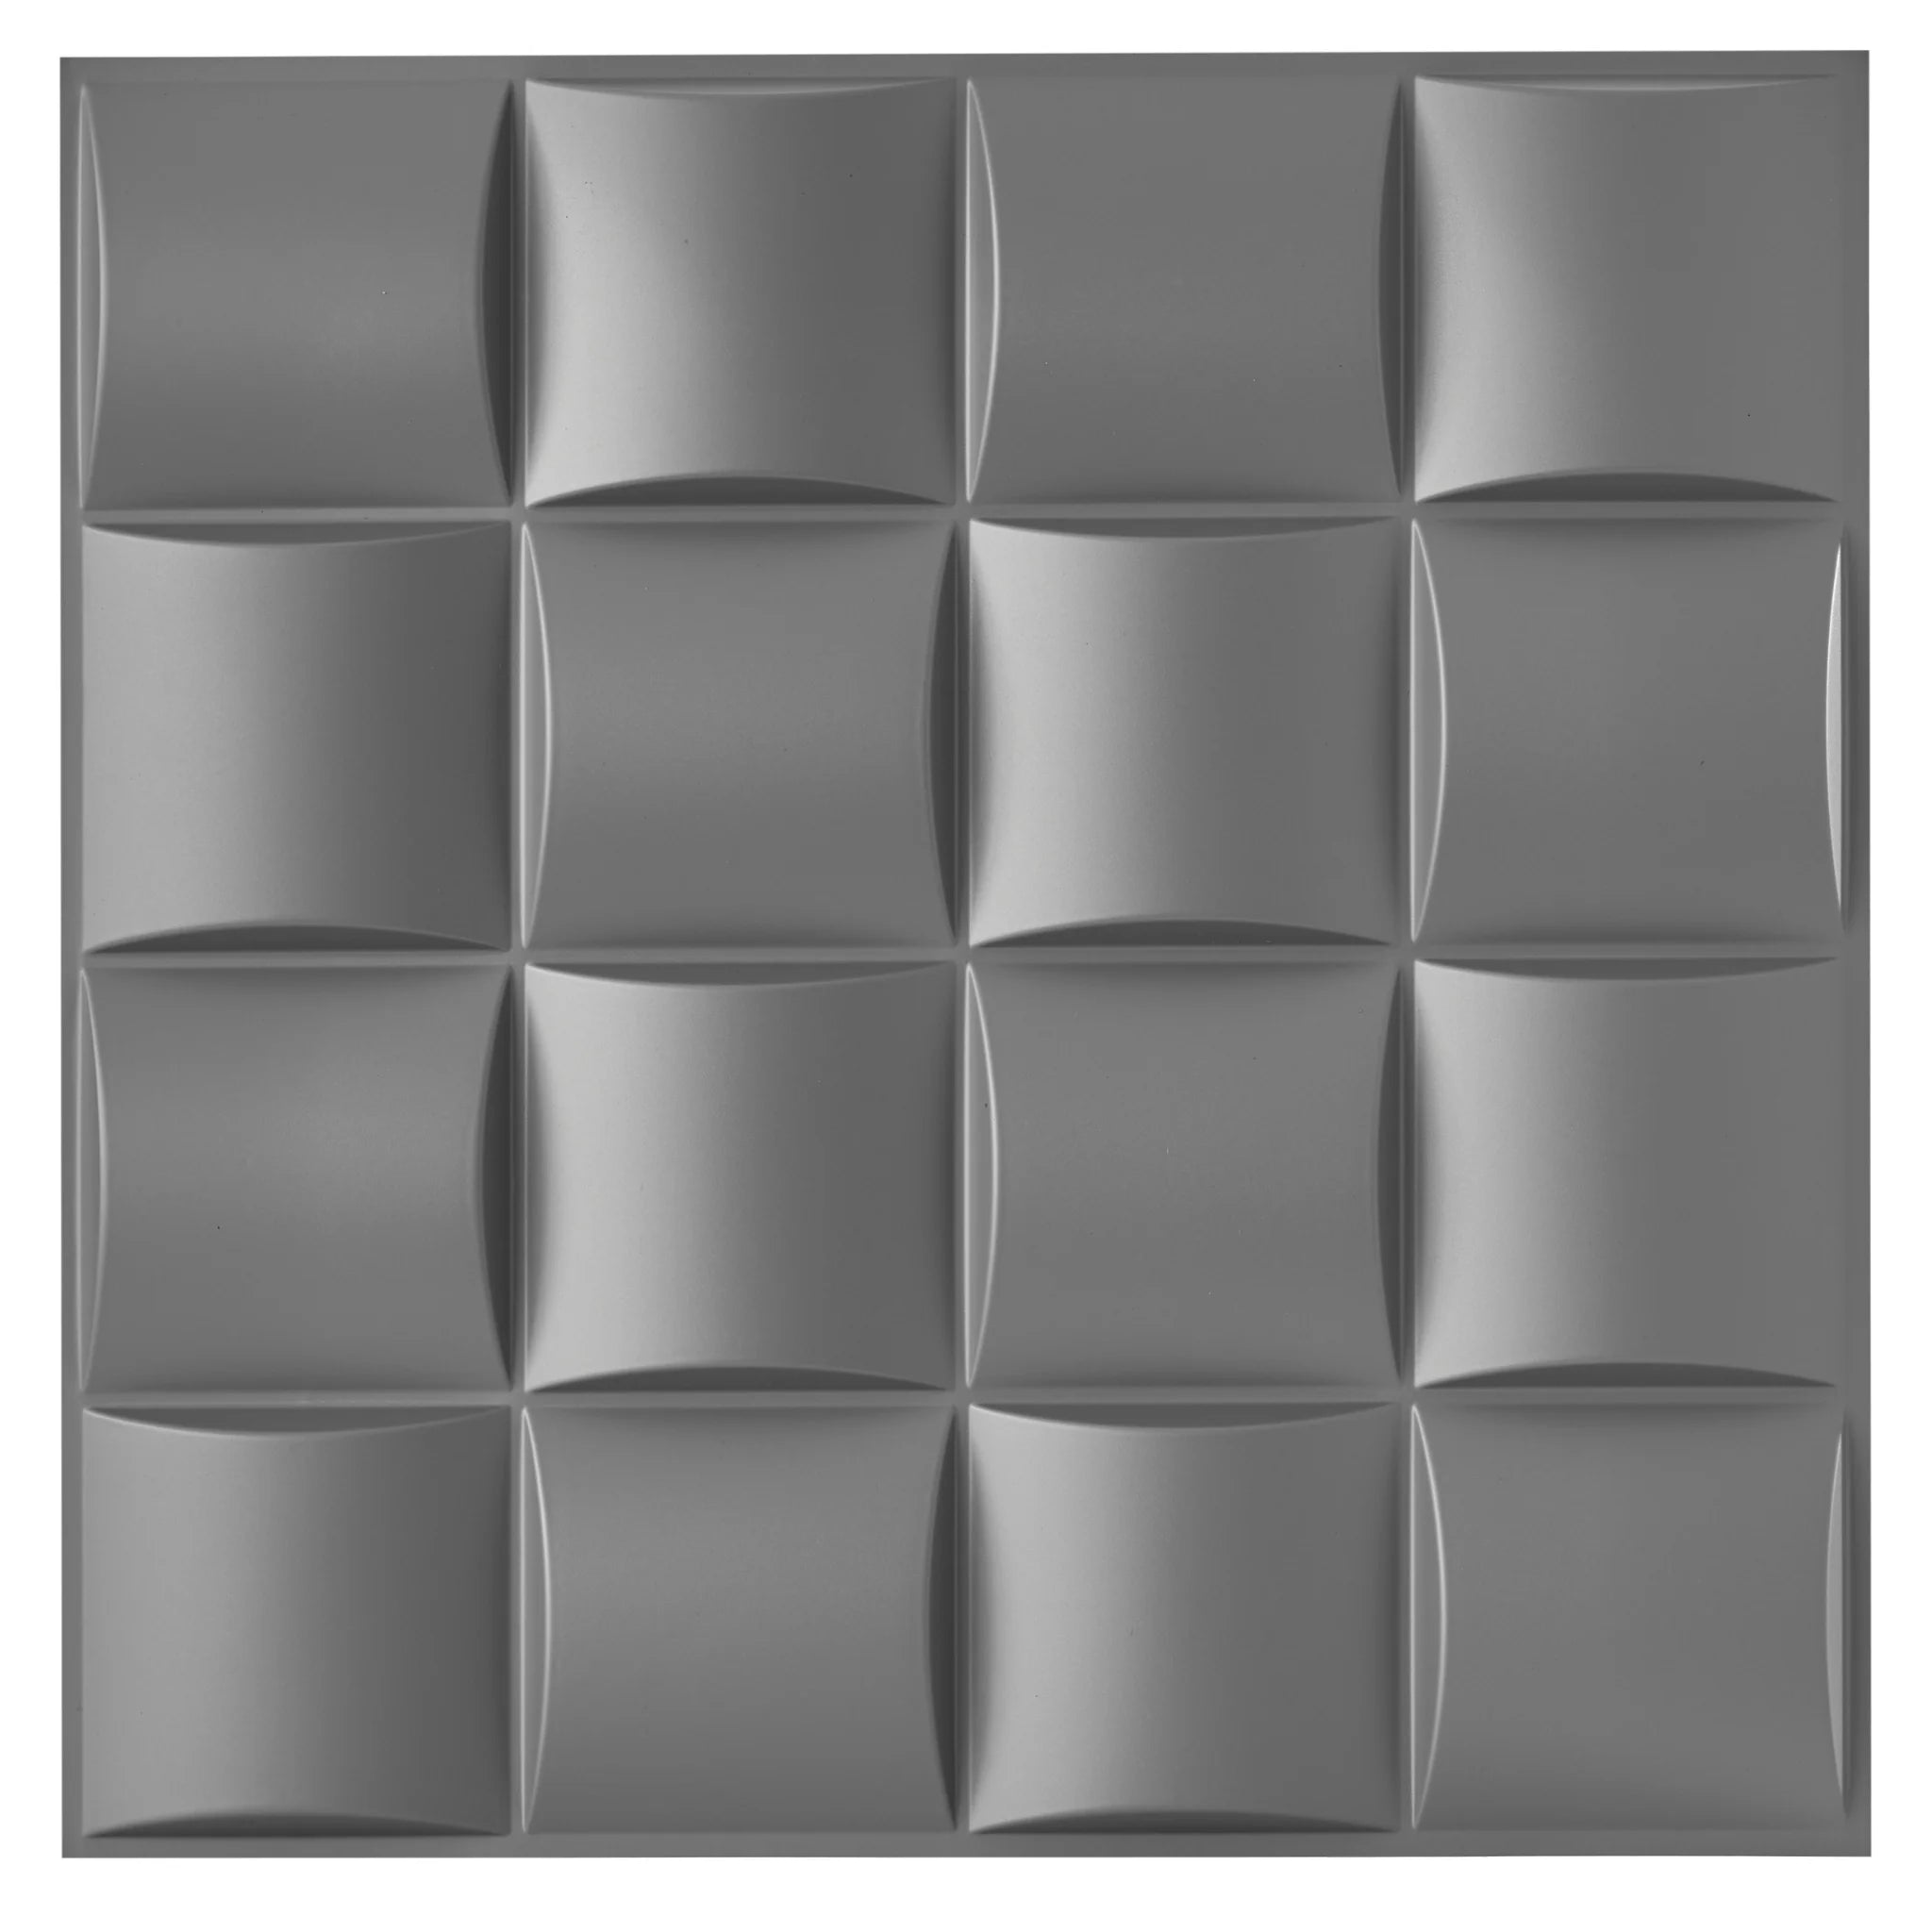 Grey PVC wall panel with curved square pattern, 50x50 cm